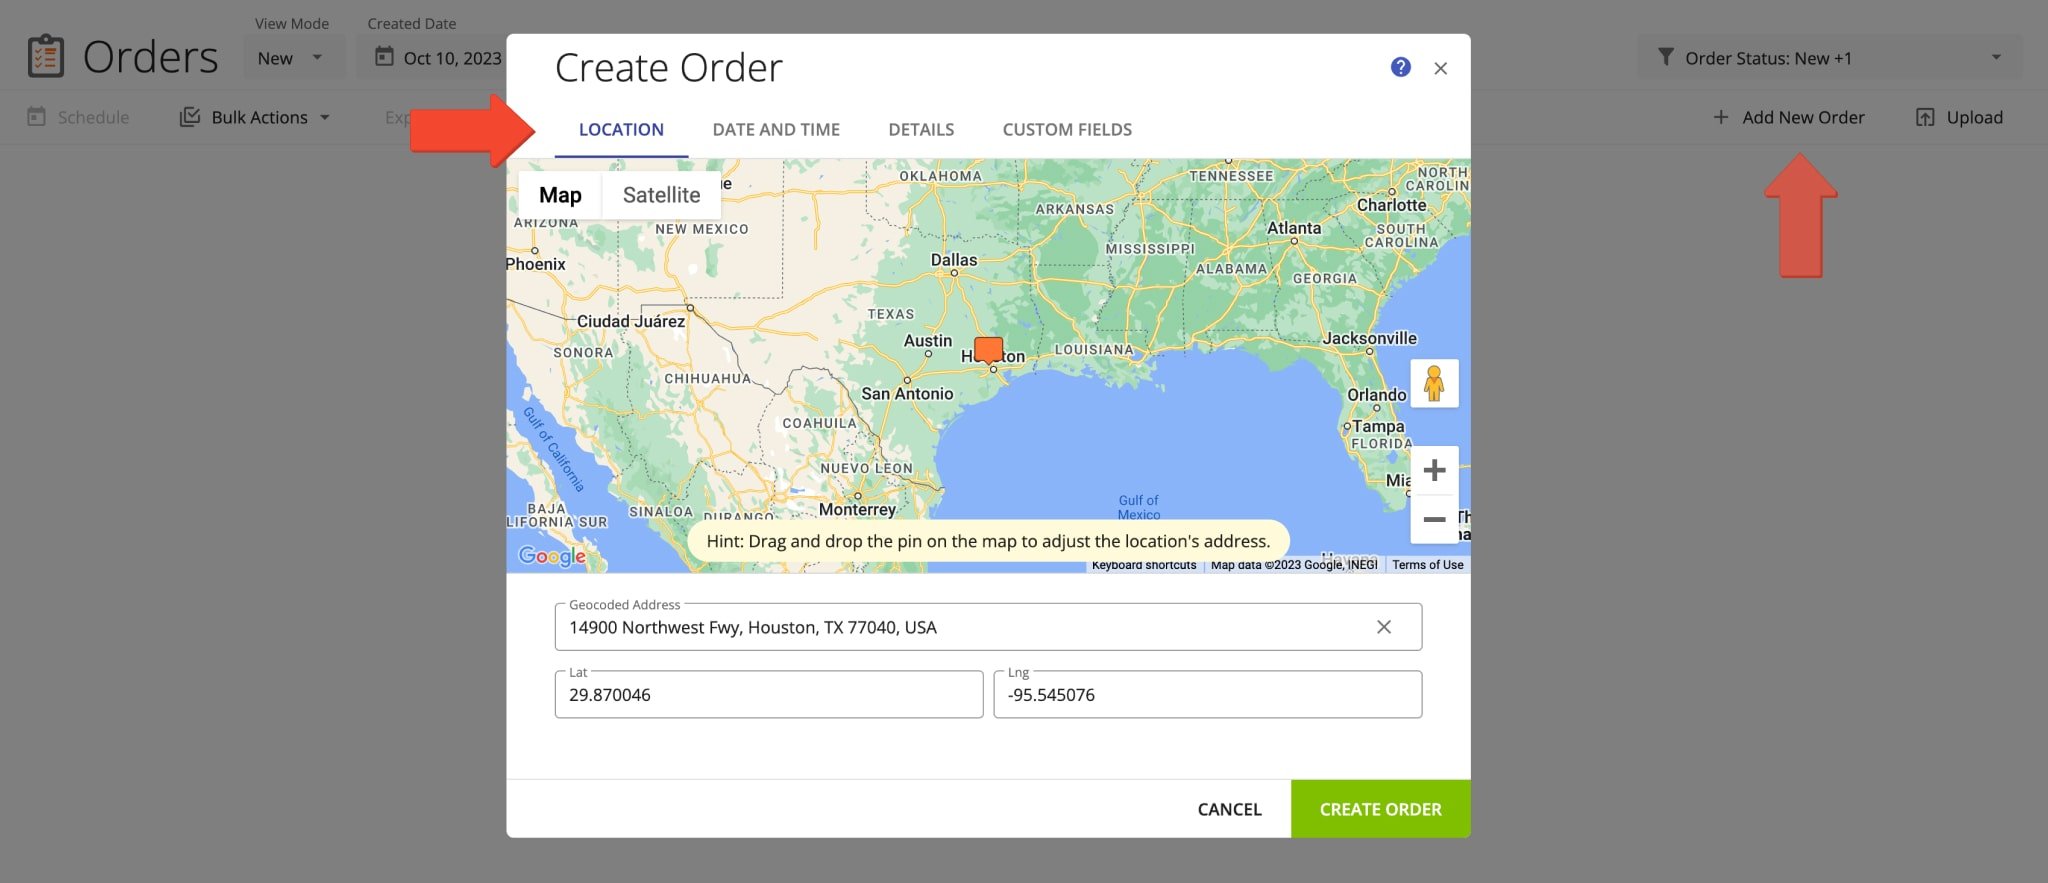 Add a new order with a geocoded address to Route4Me's Delivery Management System.